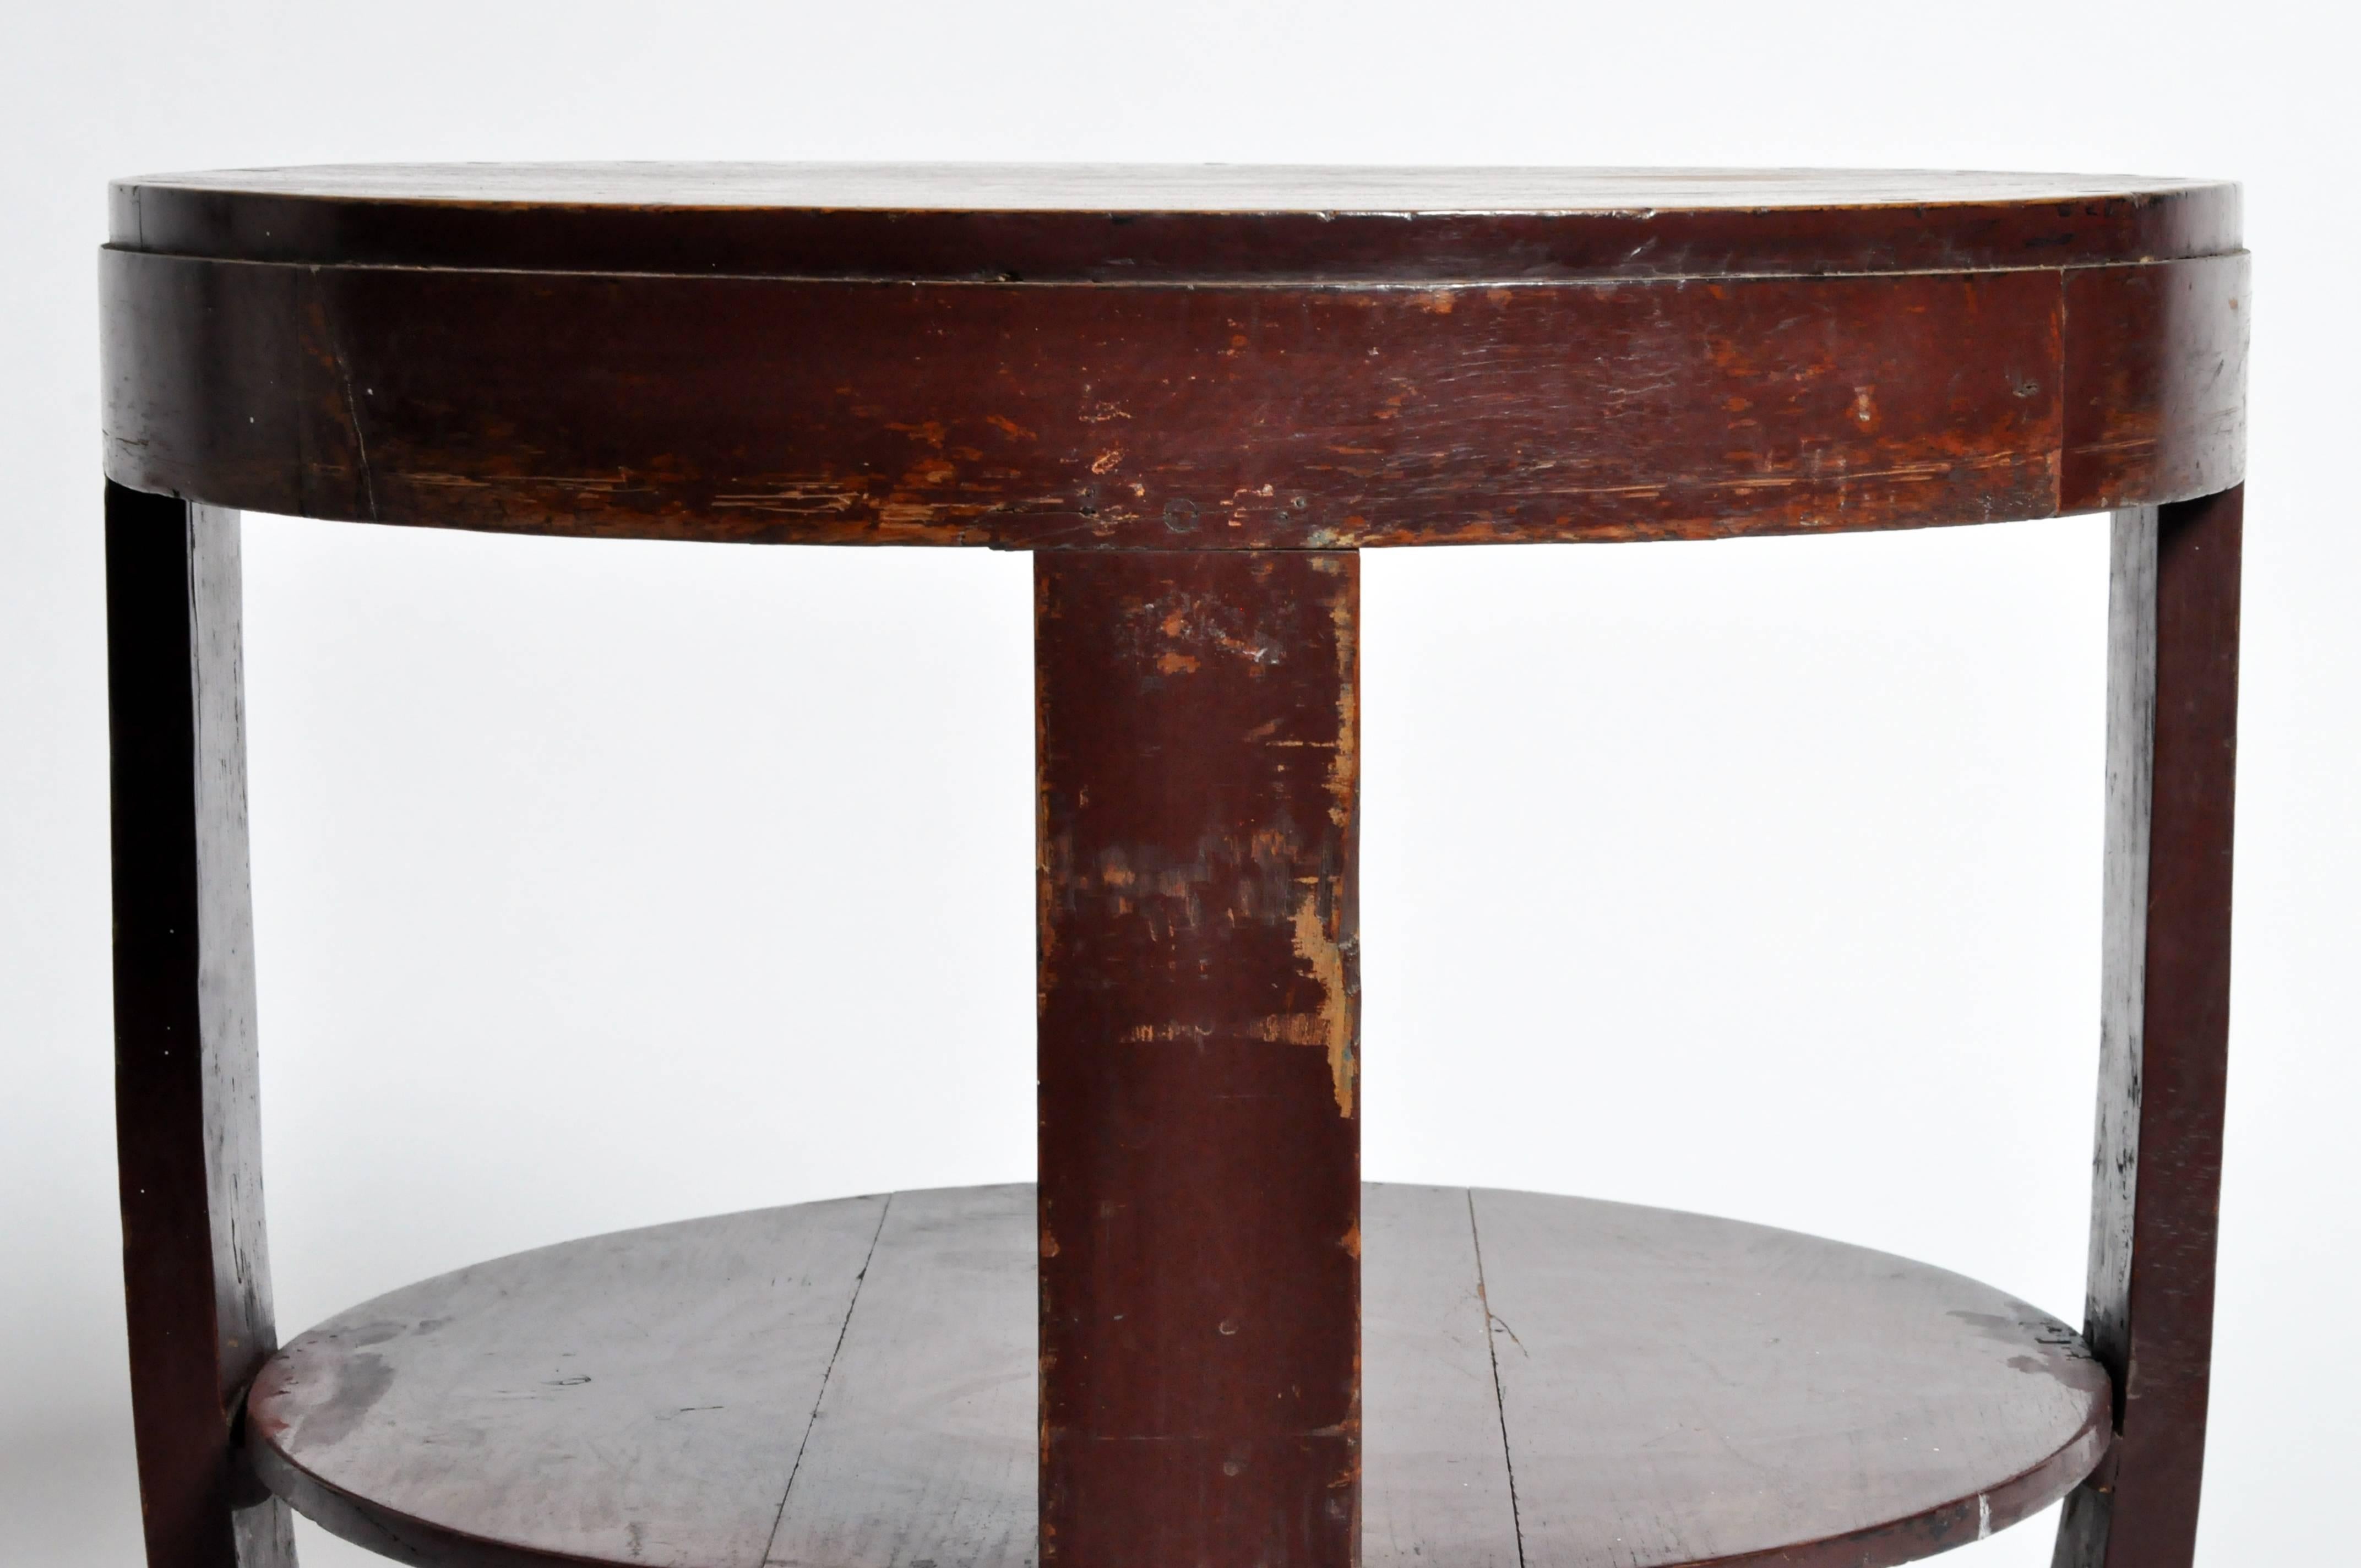 British Colonial Art Deco Round Table 1